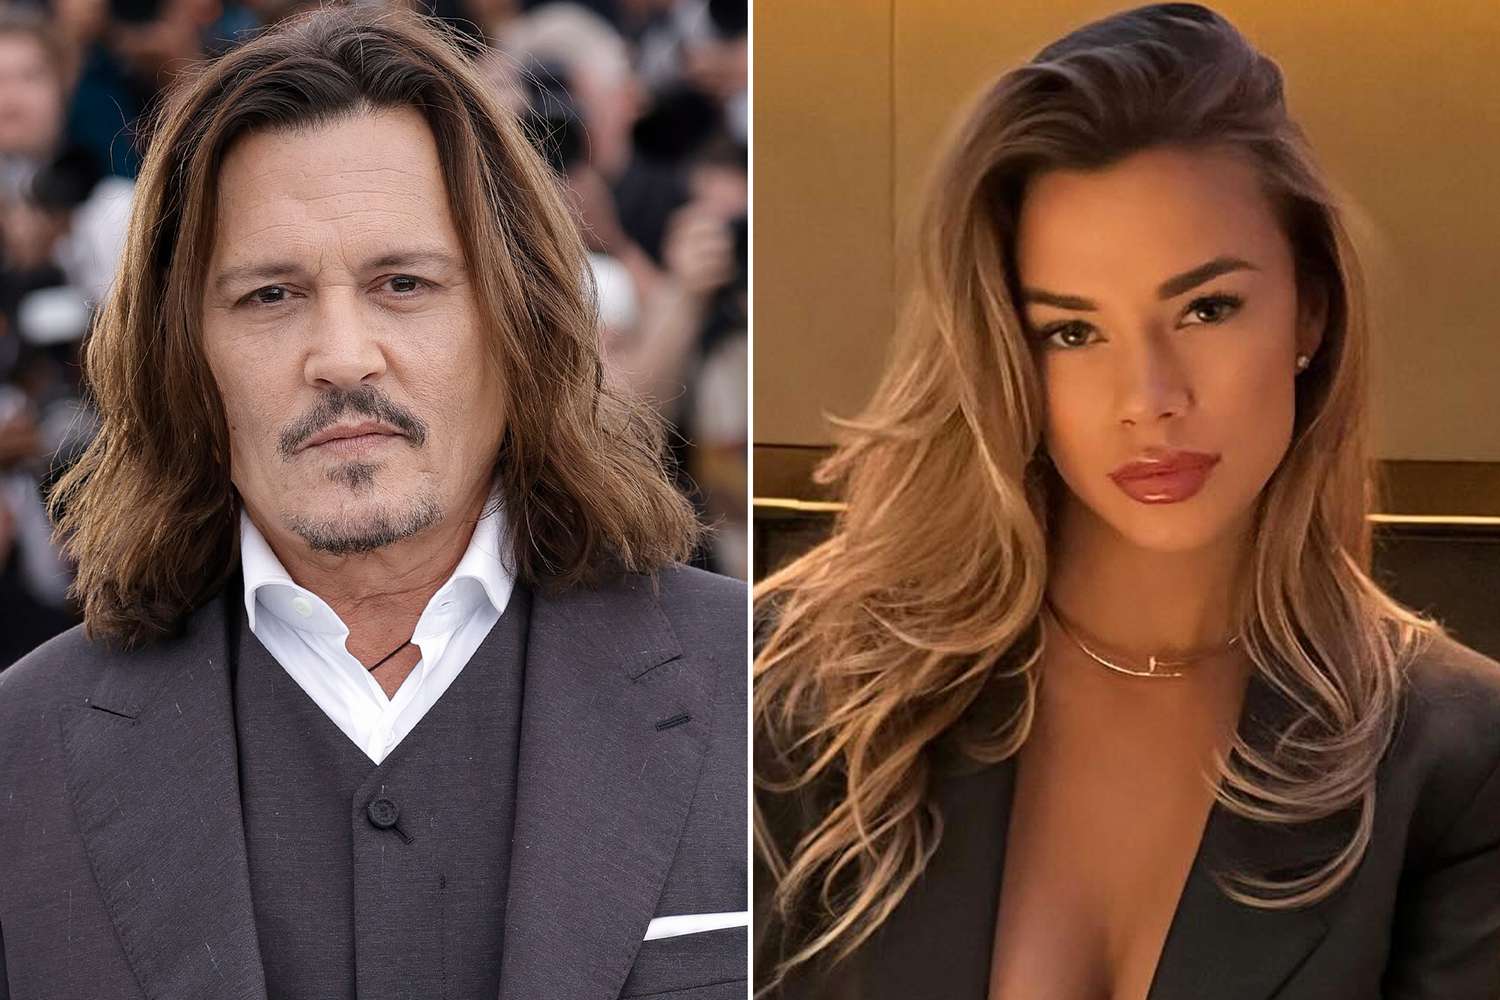 Who Is Johnny Depp Dating? All About His 'Casual' Relationship with Model Yulia Vlasova